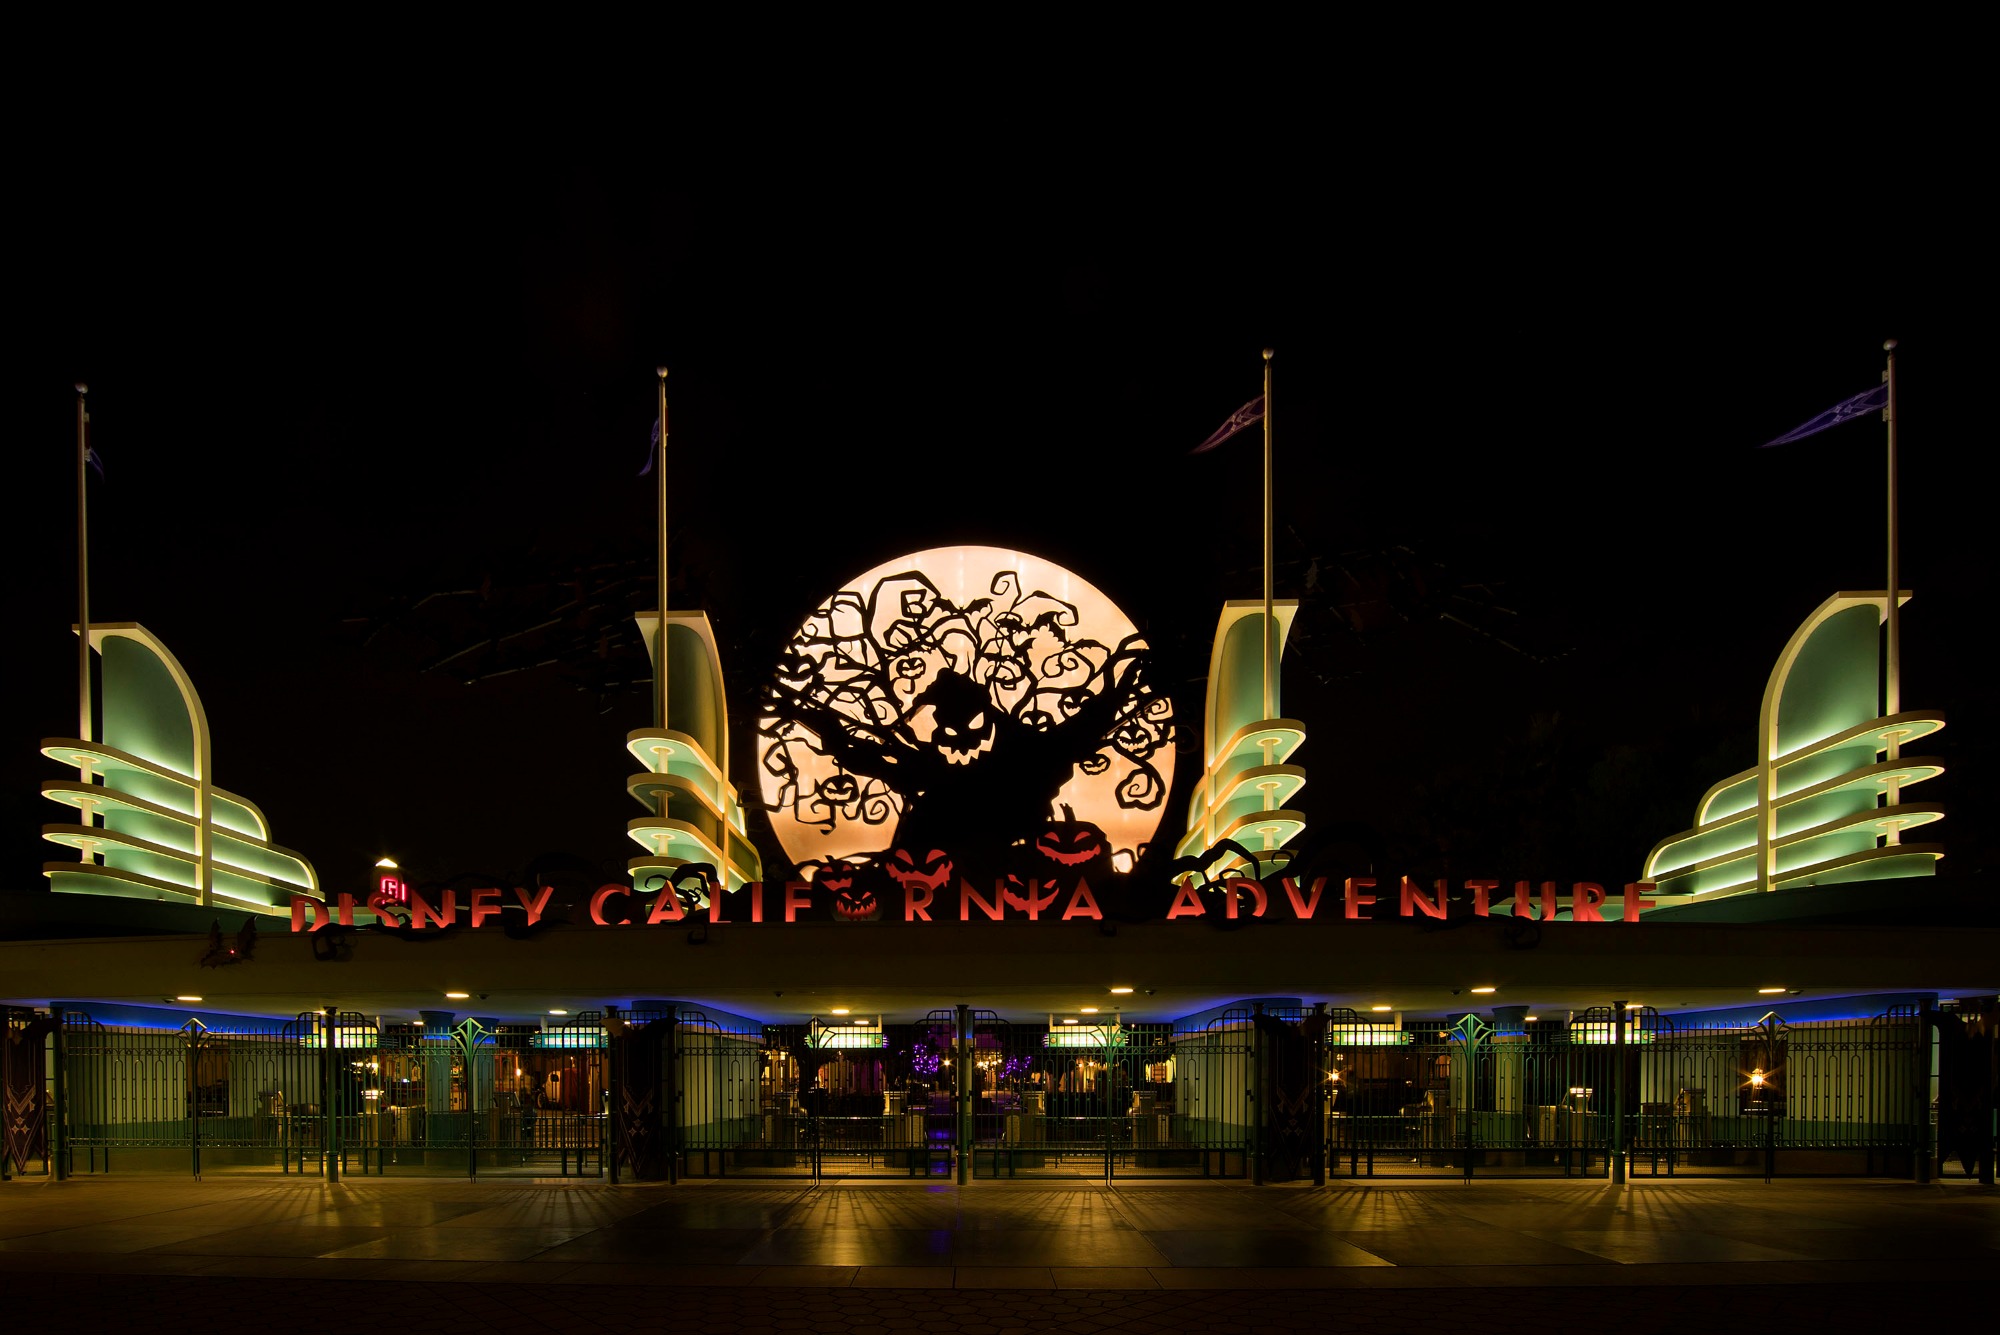 HALLOWEEN TIME COMES TO DISNEY CALIFORNIA ADVENTURE PARK -- Oogie Boogie takes over Disney California Adventure with his twisted tale of a forever Halloween, inspired by ÒTim BurtonÕs The Nightmare Before ChristmasÓ during Halloween Time at the Disneyland Resort. Oogie BoogieÕs oversized silhouette beckons guests through the main entrance of Disney California Adventure park and he brings to life a swarm of bats around Carthay Circle Restaurant and Lounge. (Joshua Sudock/Disneyland Resort)